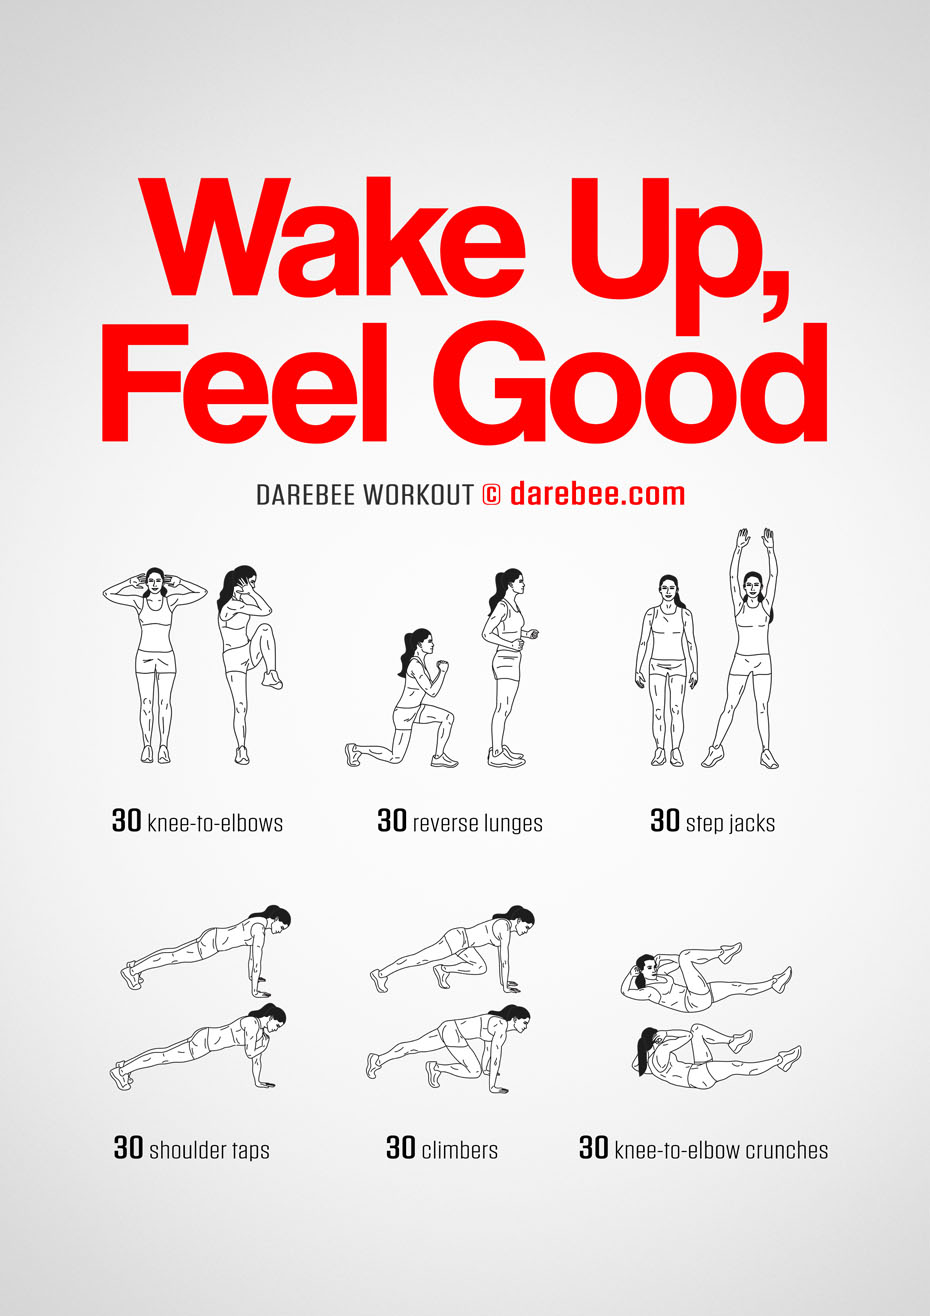 Wake Up, Feel Good is the kind of Darebee home fitness workout that if you do it in the morning will keep you feeling good all day long.